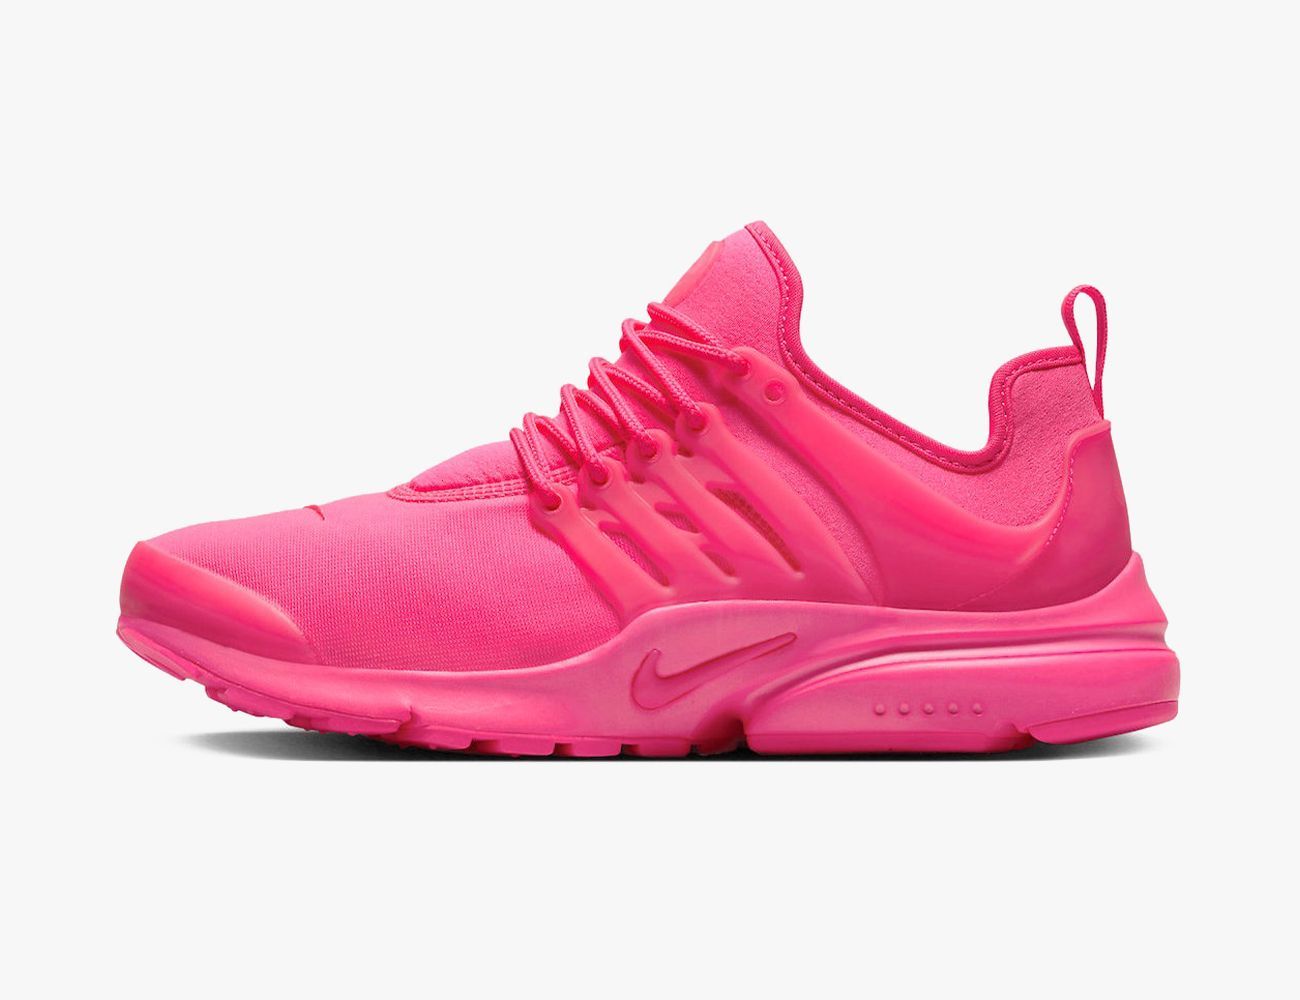 Gewoon overlopen temperen Van God Nike Is Pushing Pink Shoes. Can the Color Make a Comeback Again?